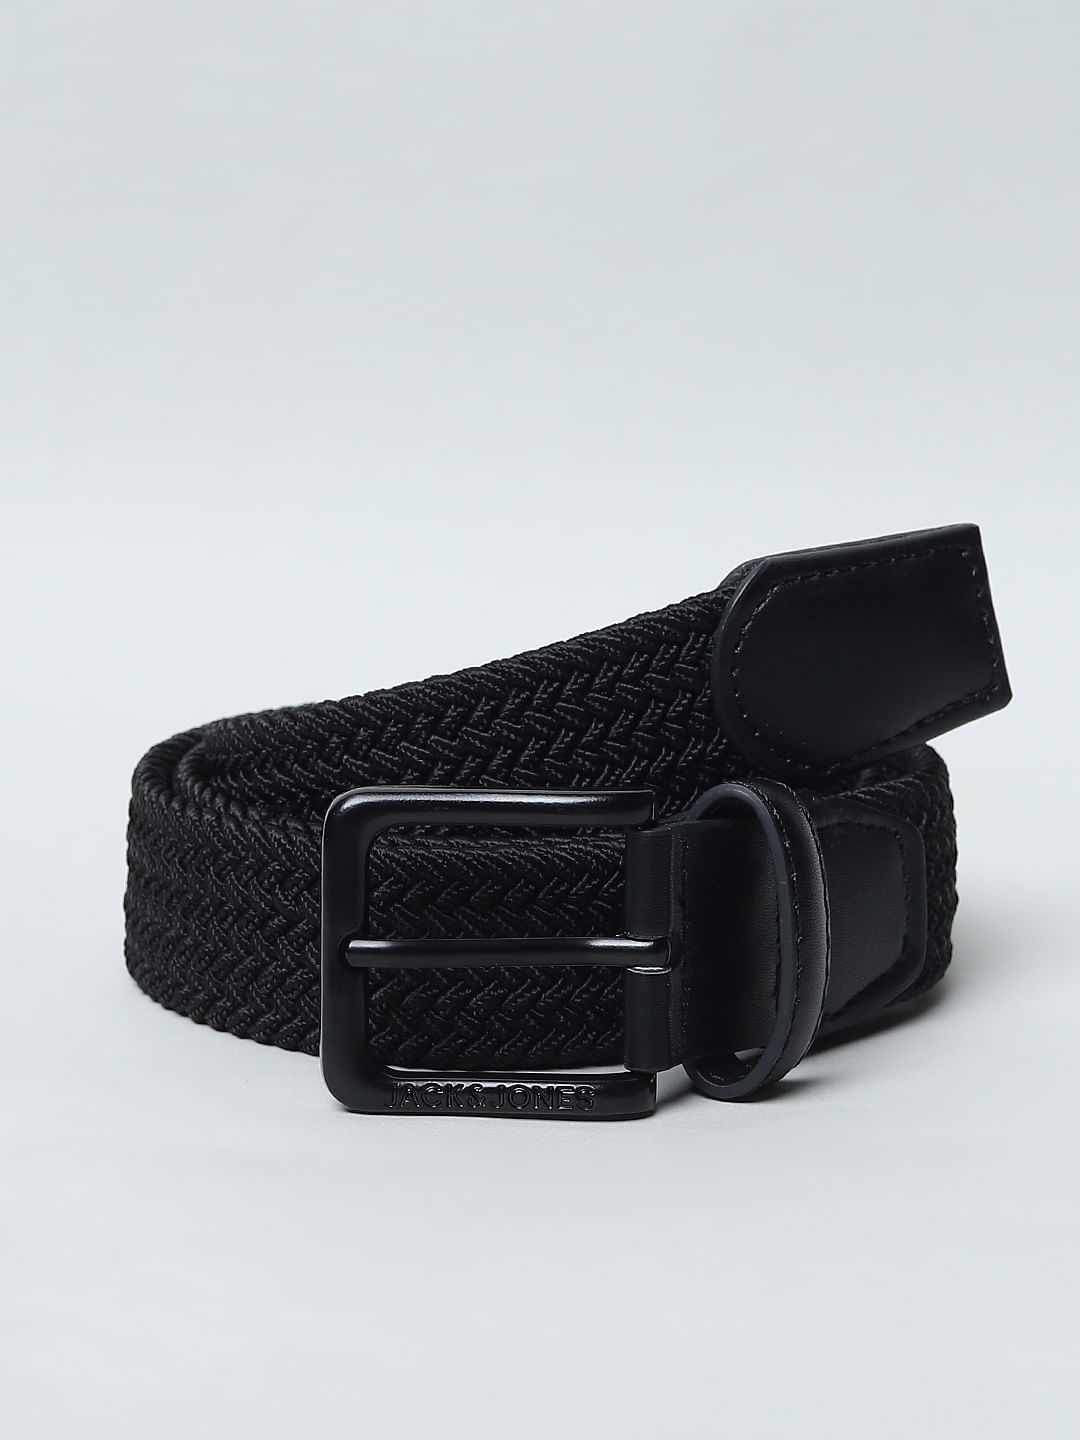 Men’s belts starting from Rs 499